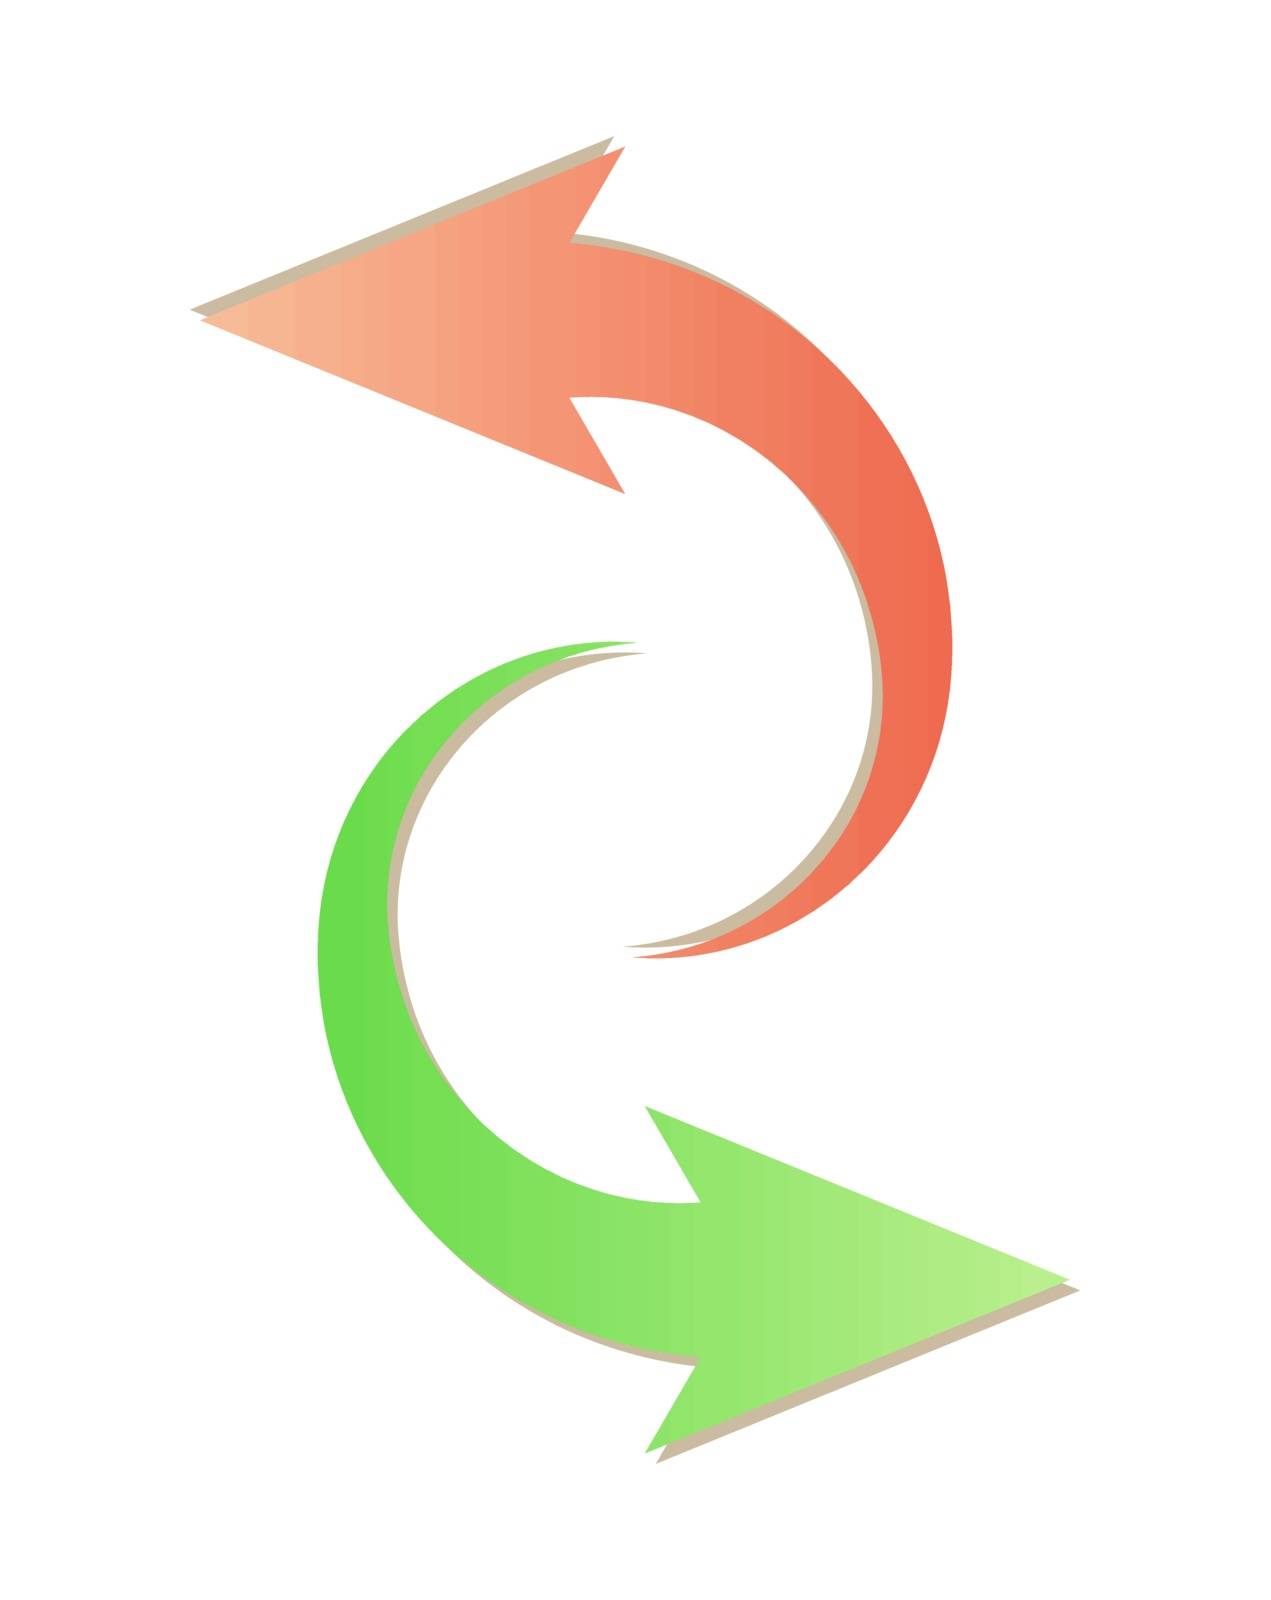 gradient rounded arrows with green and red color